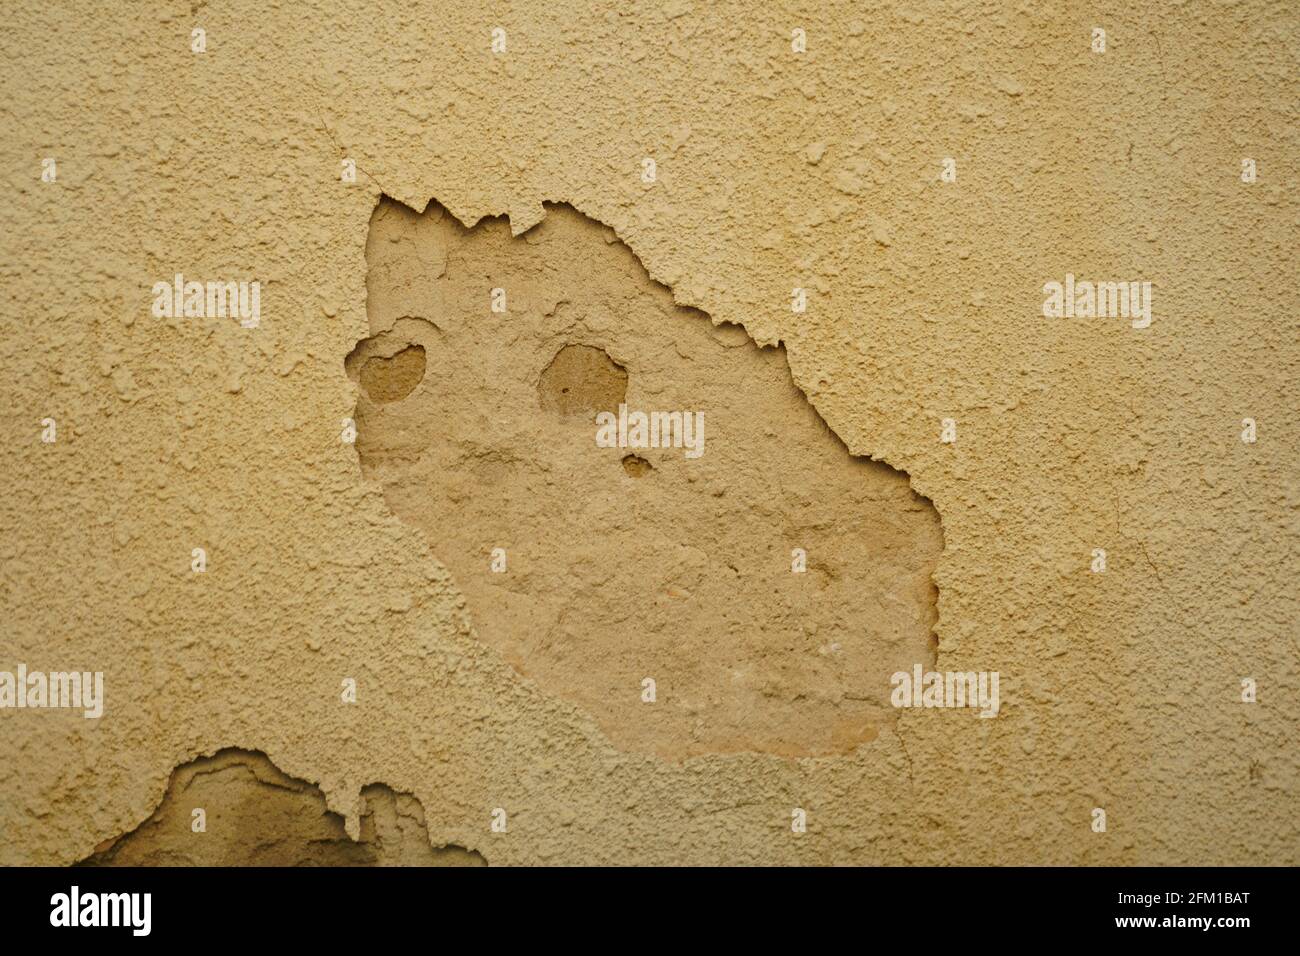 Human Face appears in cracked plaster on a wall Pareidolia is the tendency for incorrect perception of a stimulus as an object, pattern or meaning kno Stock Photo